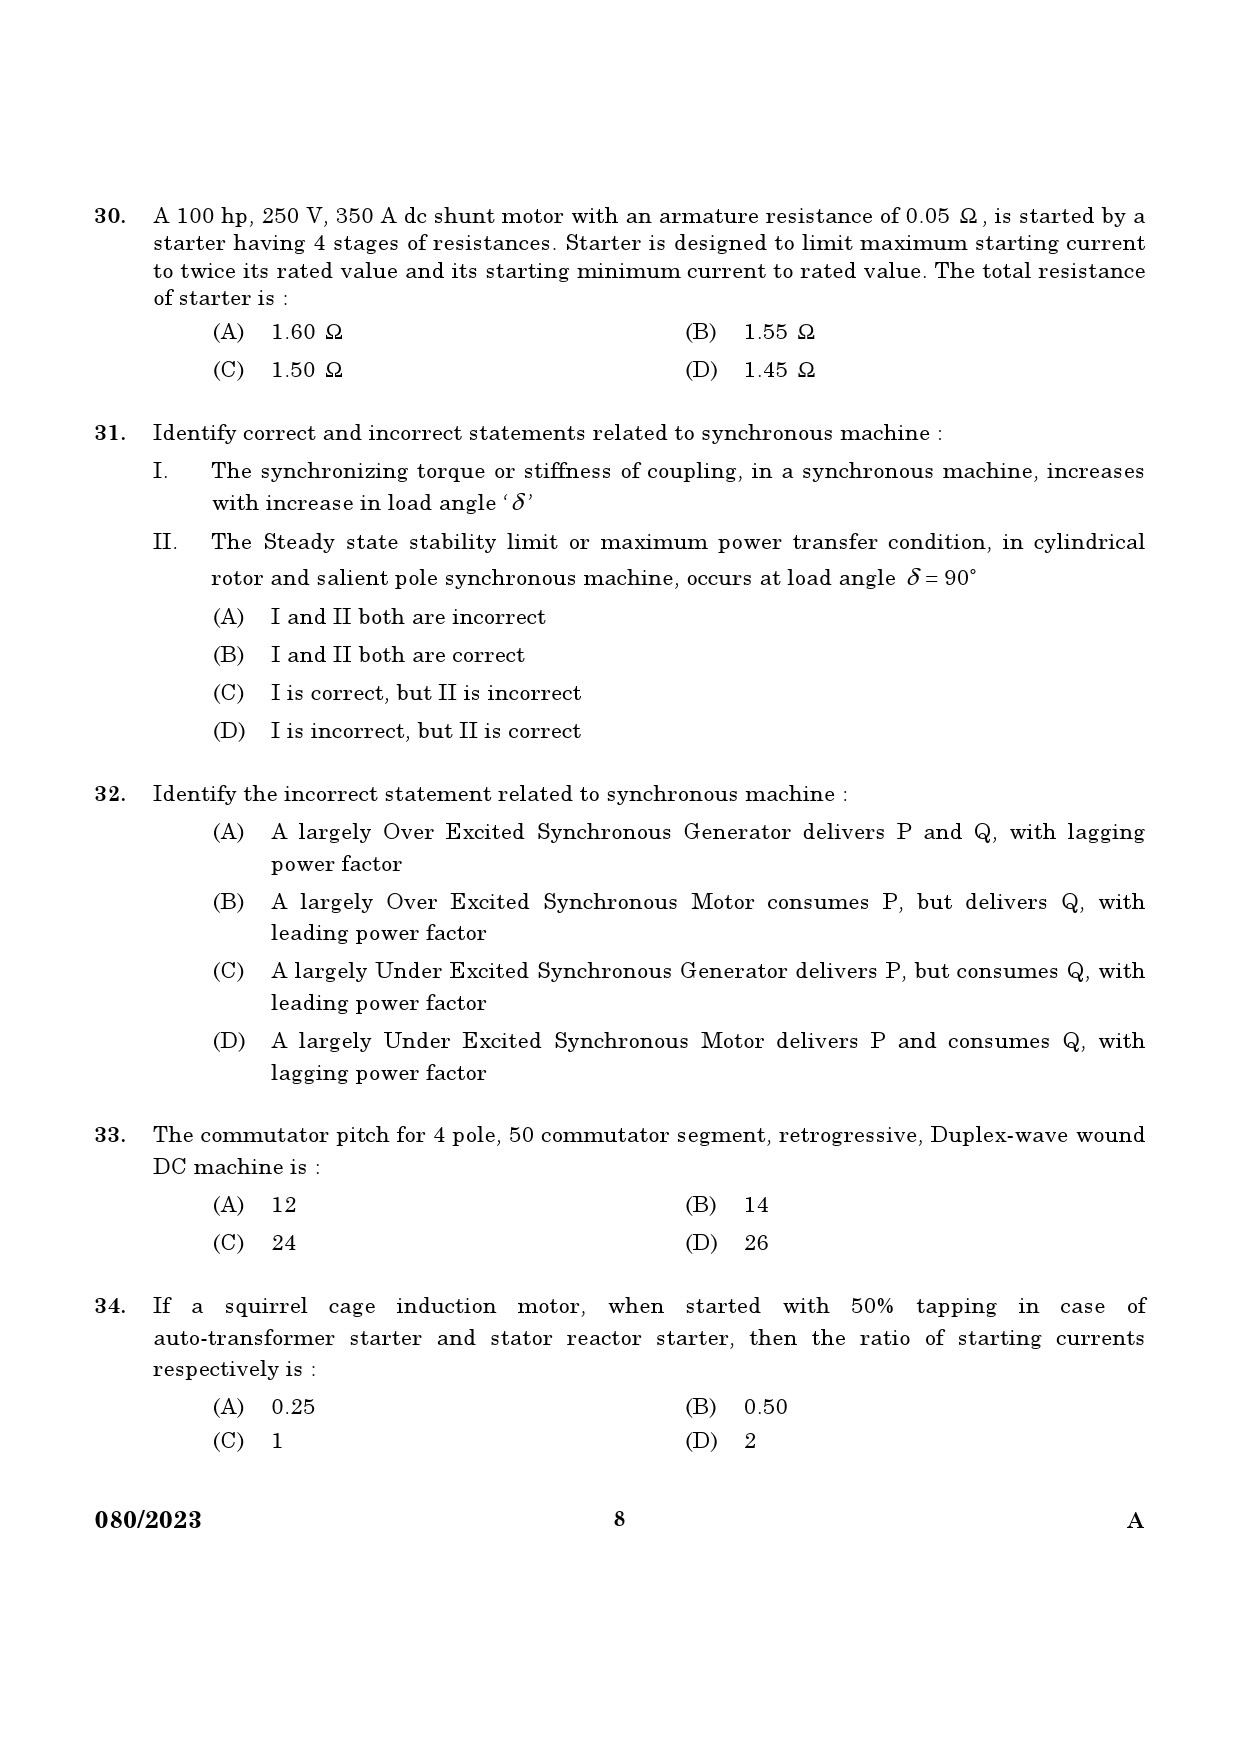 KPSC Assistant Professor Electrical and Electronics Engineering Exam 2023 Code 0802023 6